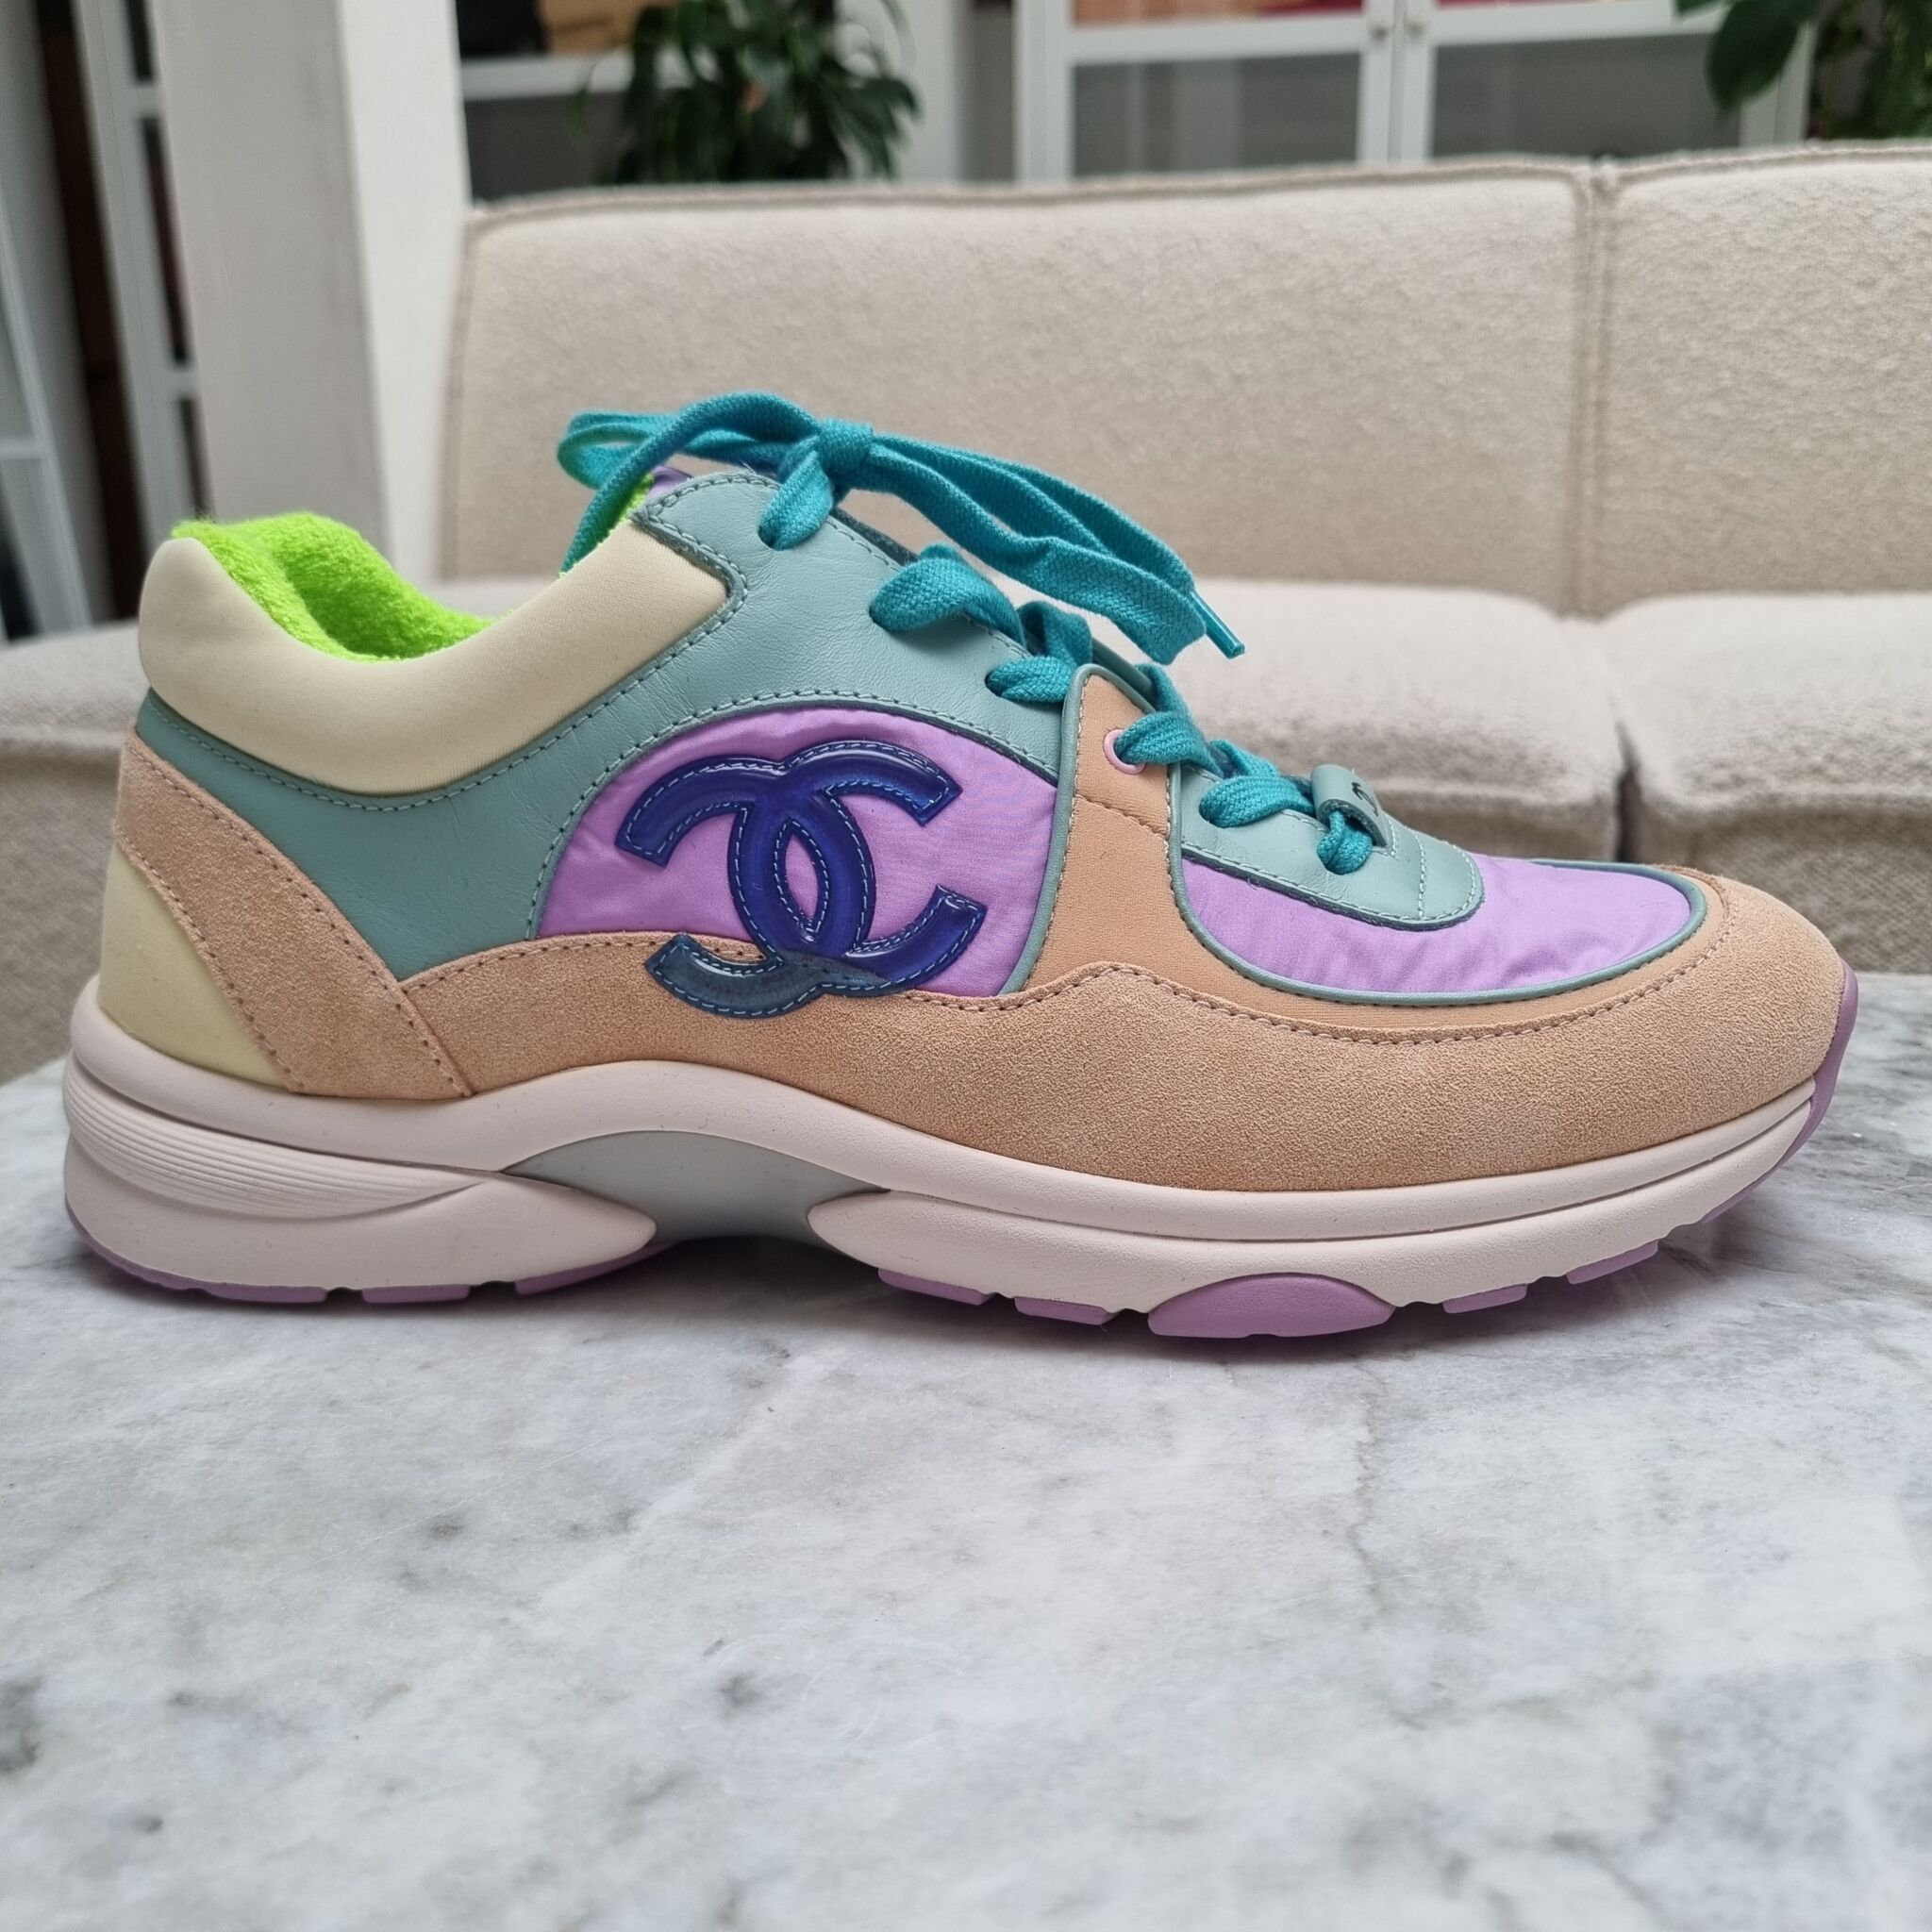 CHANEL Multicolor Leather and Fabric Interlocking CC Logo Sneakers Size 37